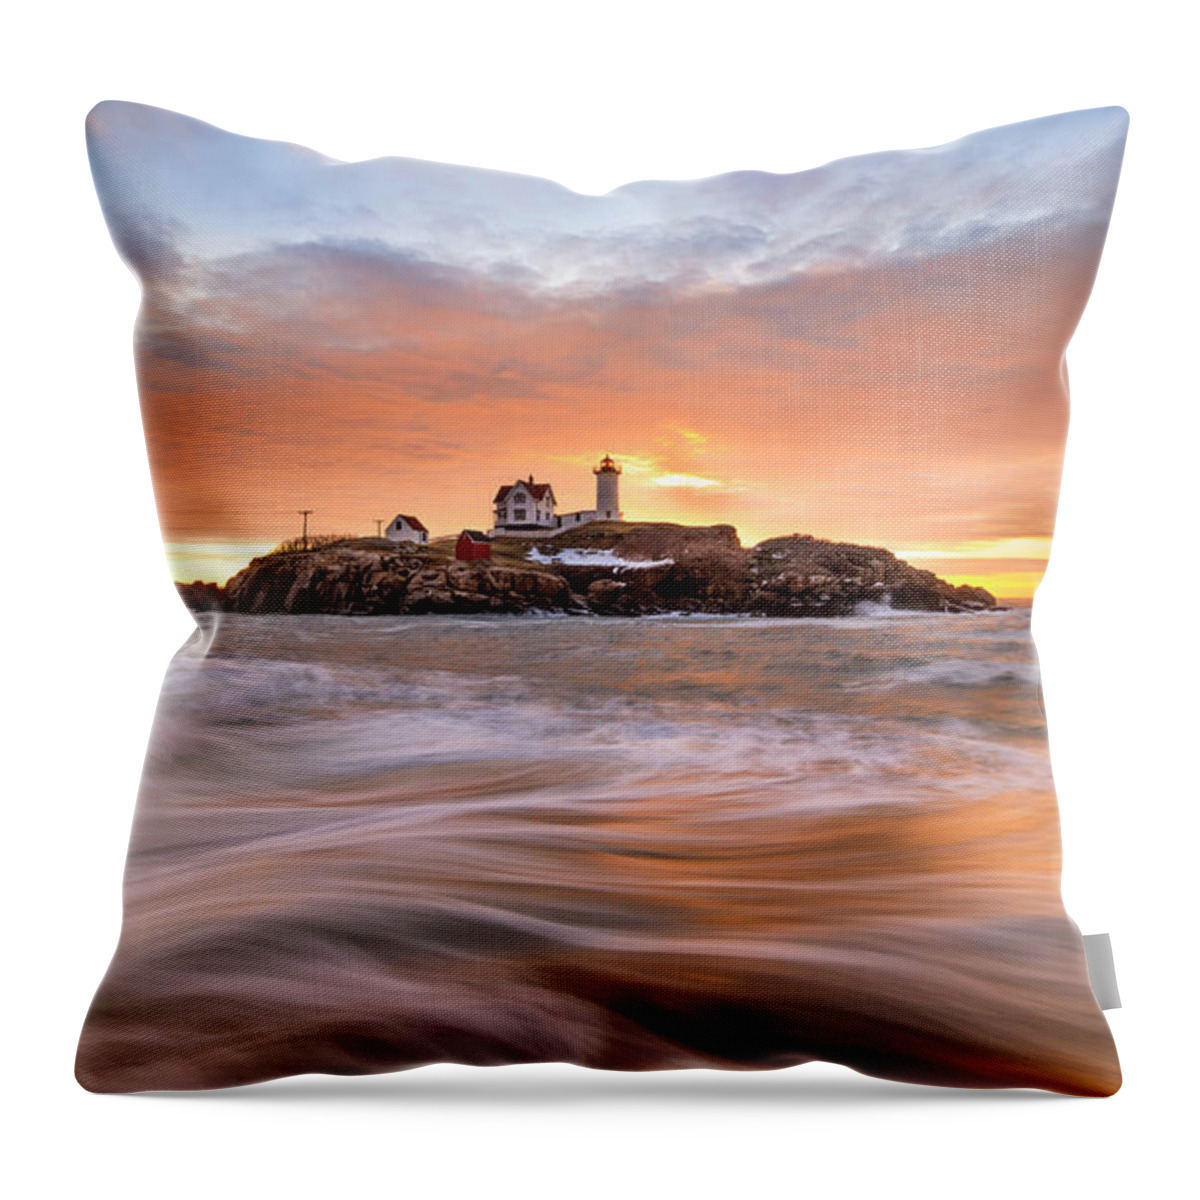 Nubble Lighthouse Throw Pillow featuring the photograph Nubble Lighthouse by Rob Davies